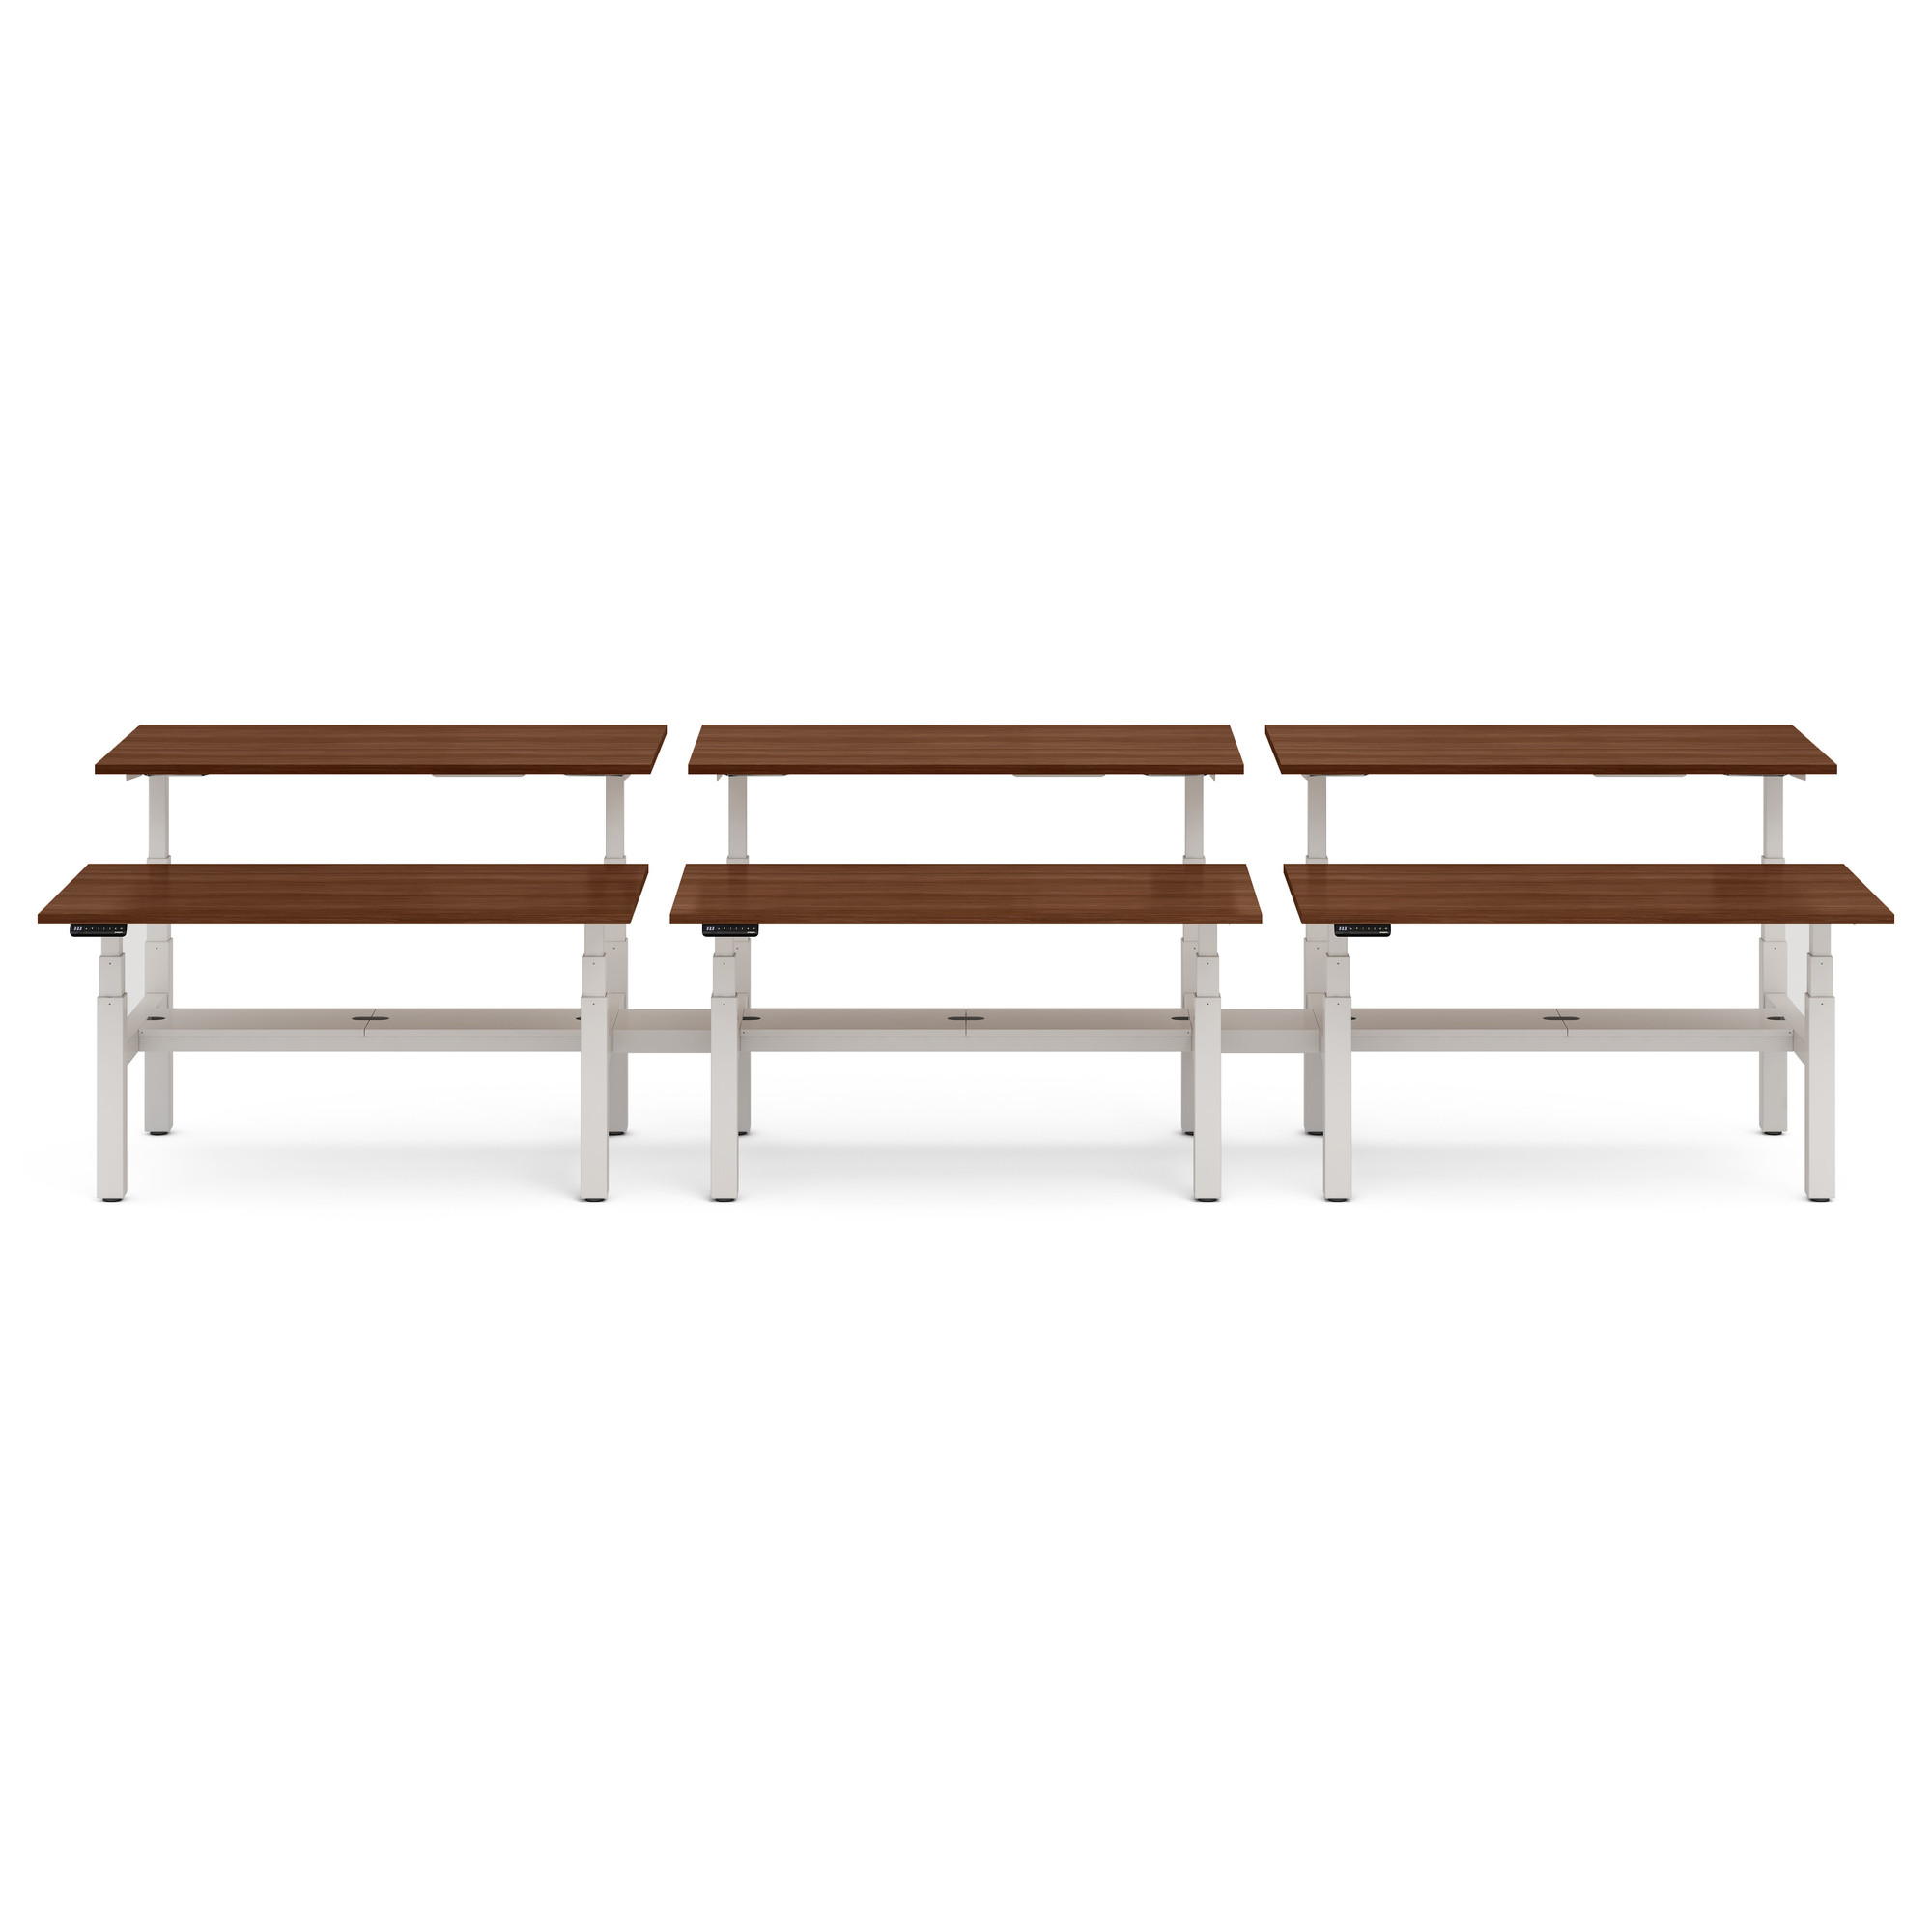 Series L Adjustable Height Double Desk for 6, Walnut, 60", White Legs,Walnut,hi-res